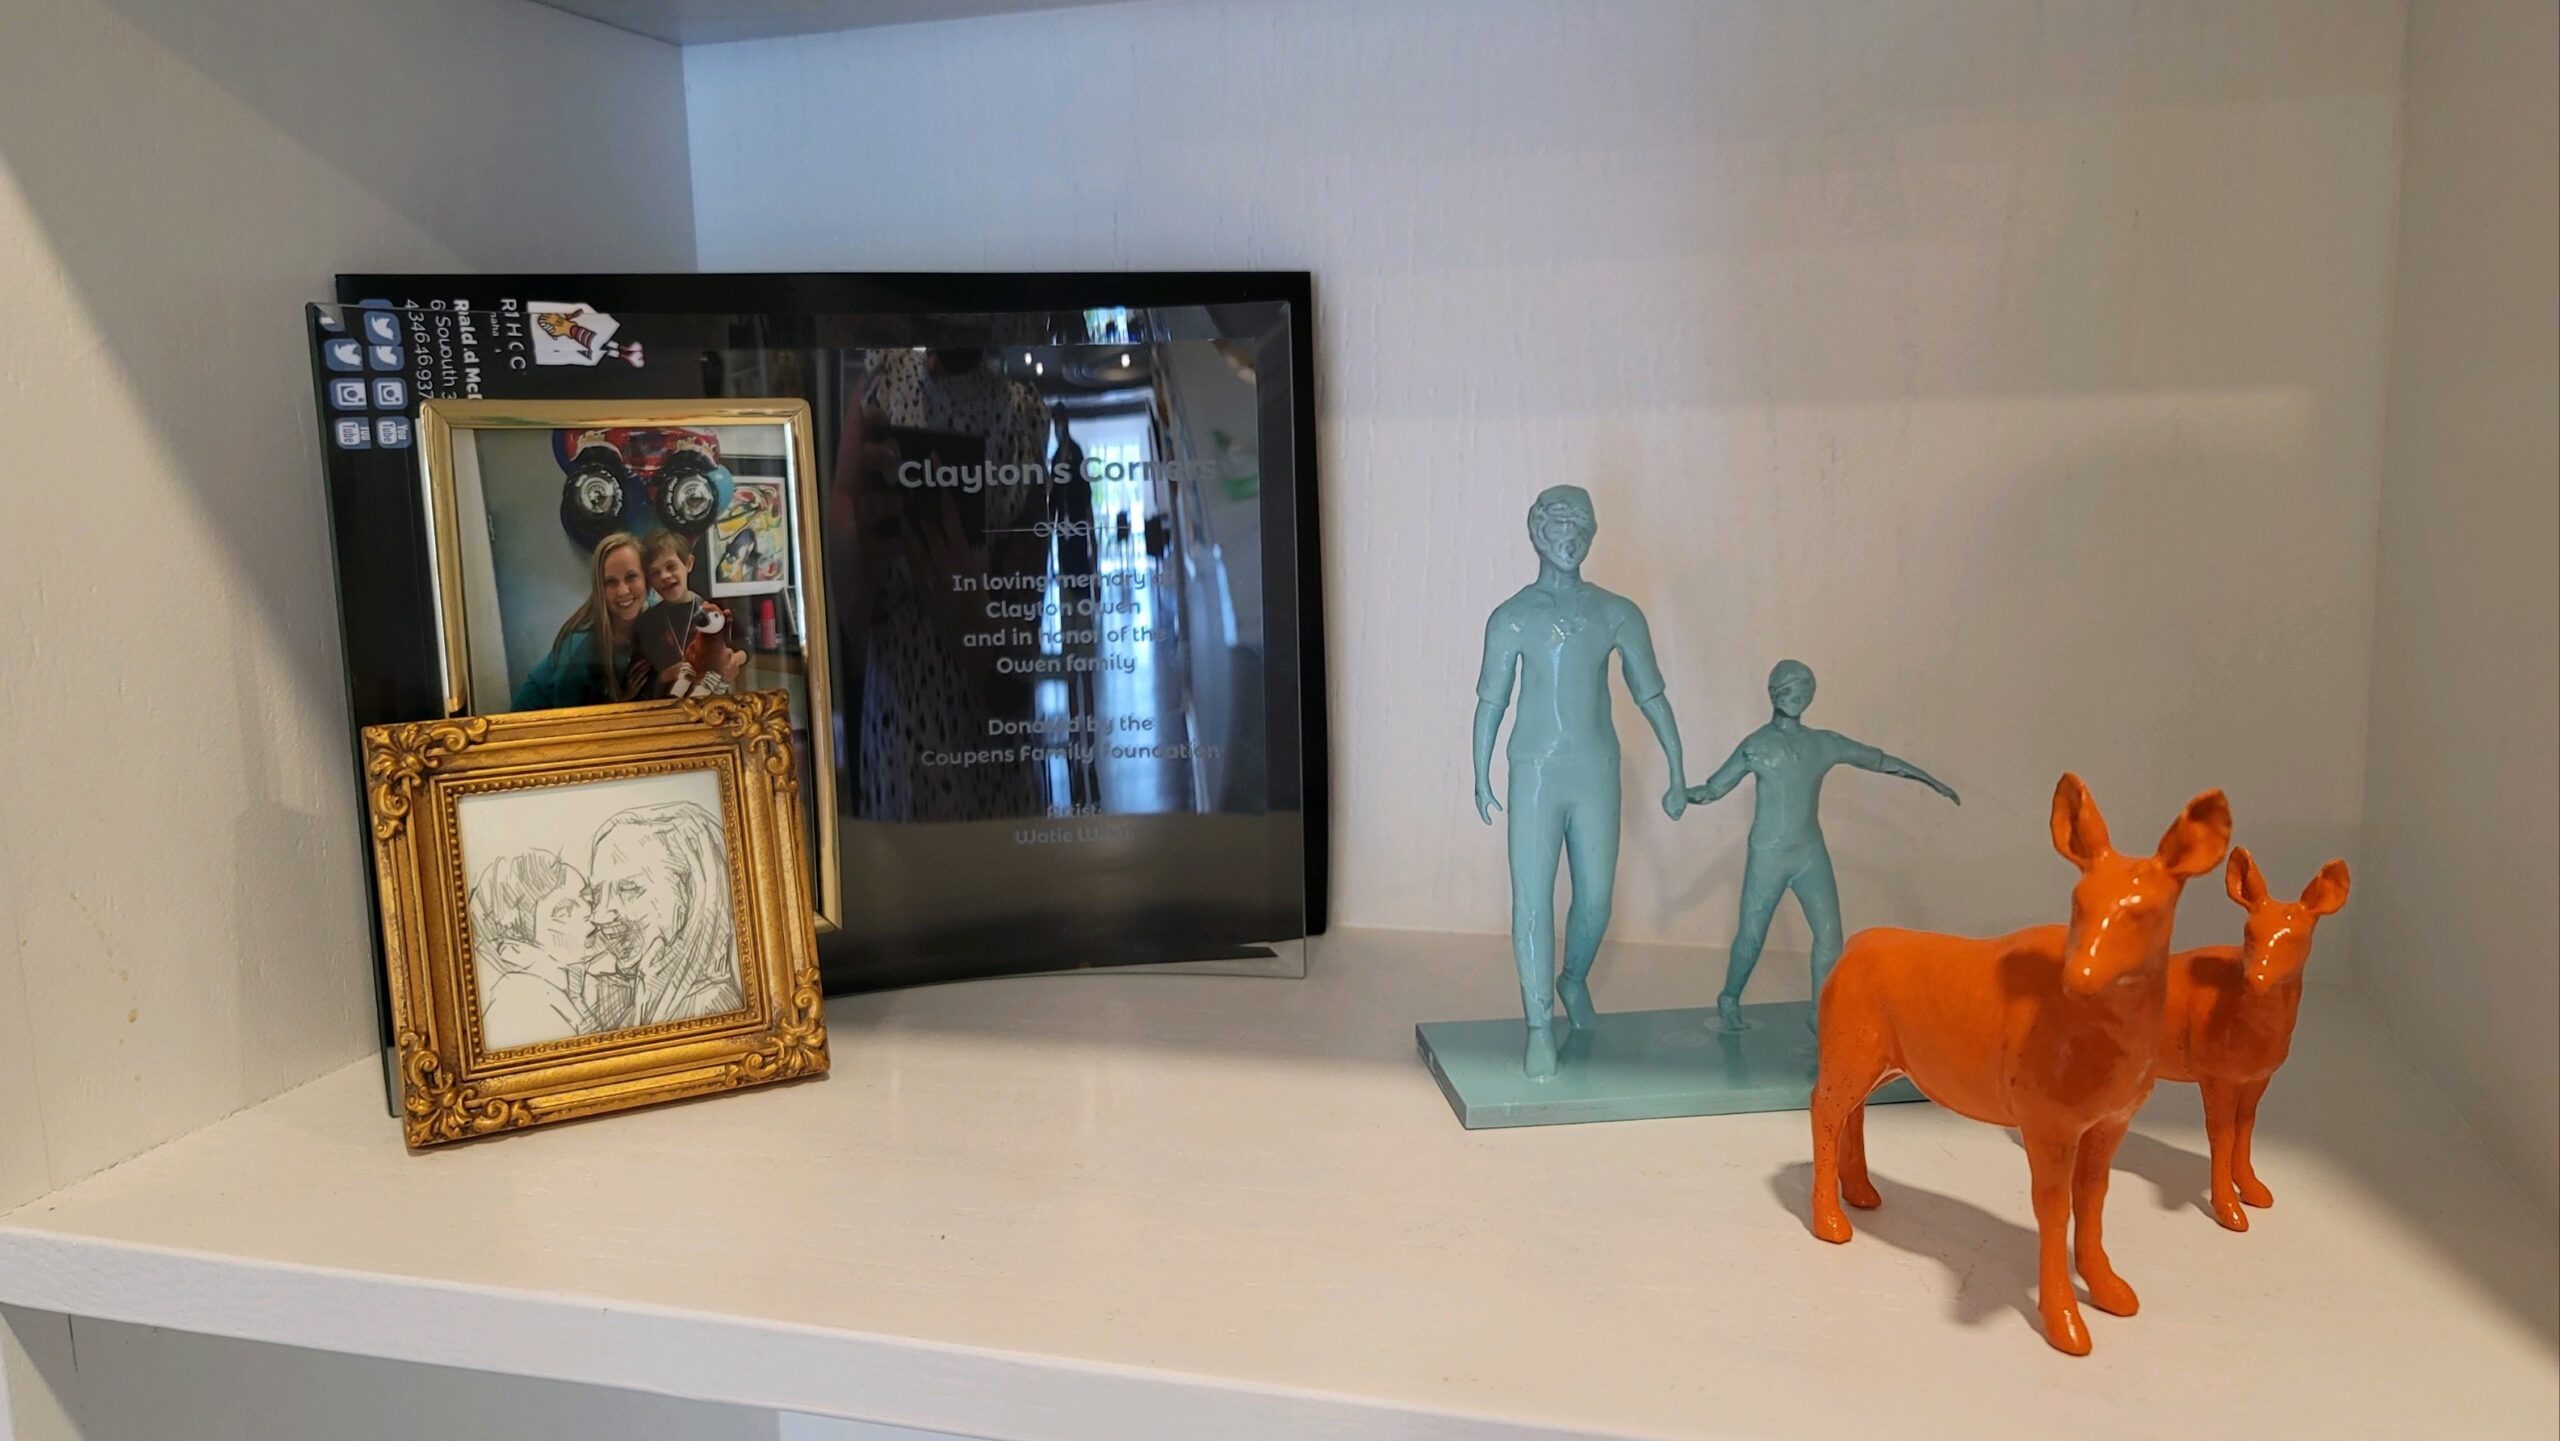 display of figurines a photo and plaque that says Clayton's Corners in loving memory of Clayton Owen and in honor of the Owen family donated by Coupens Family Foundation Artist Watie White